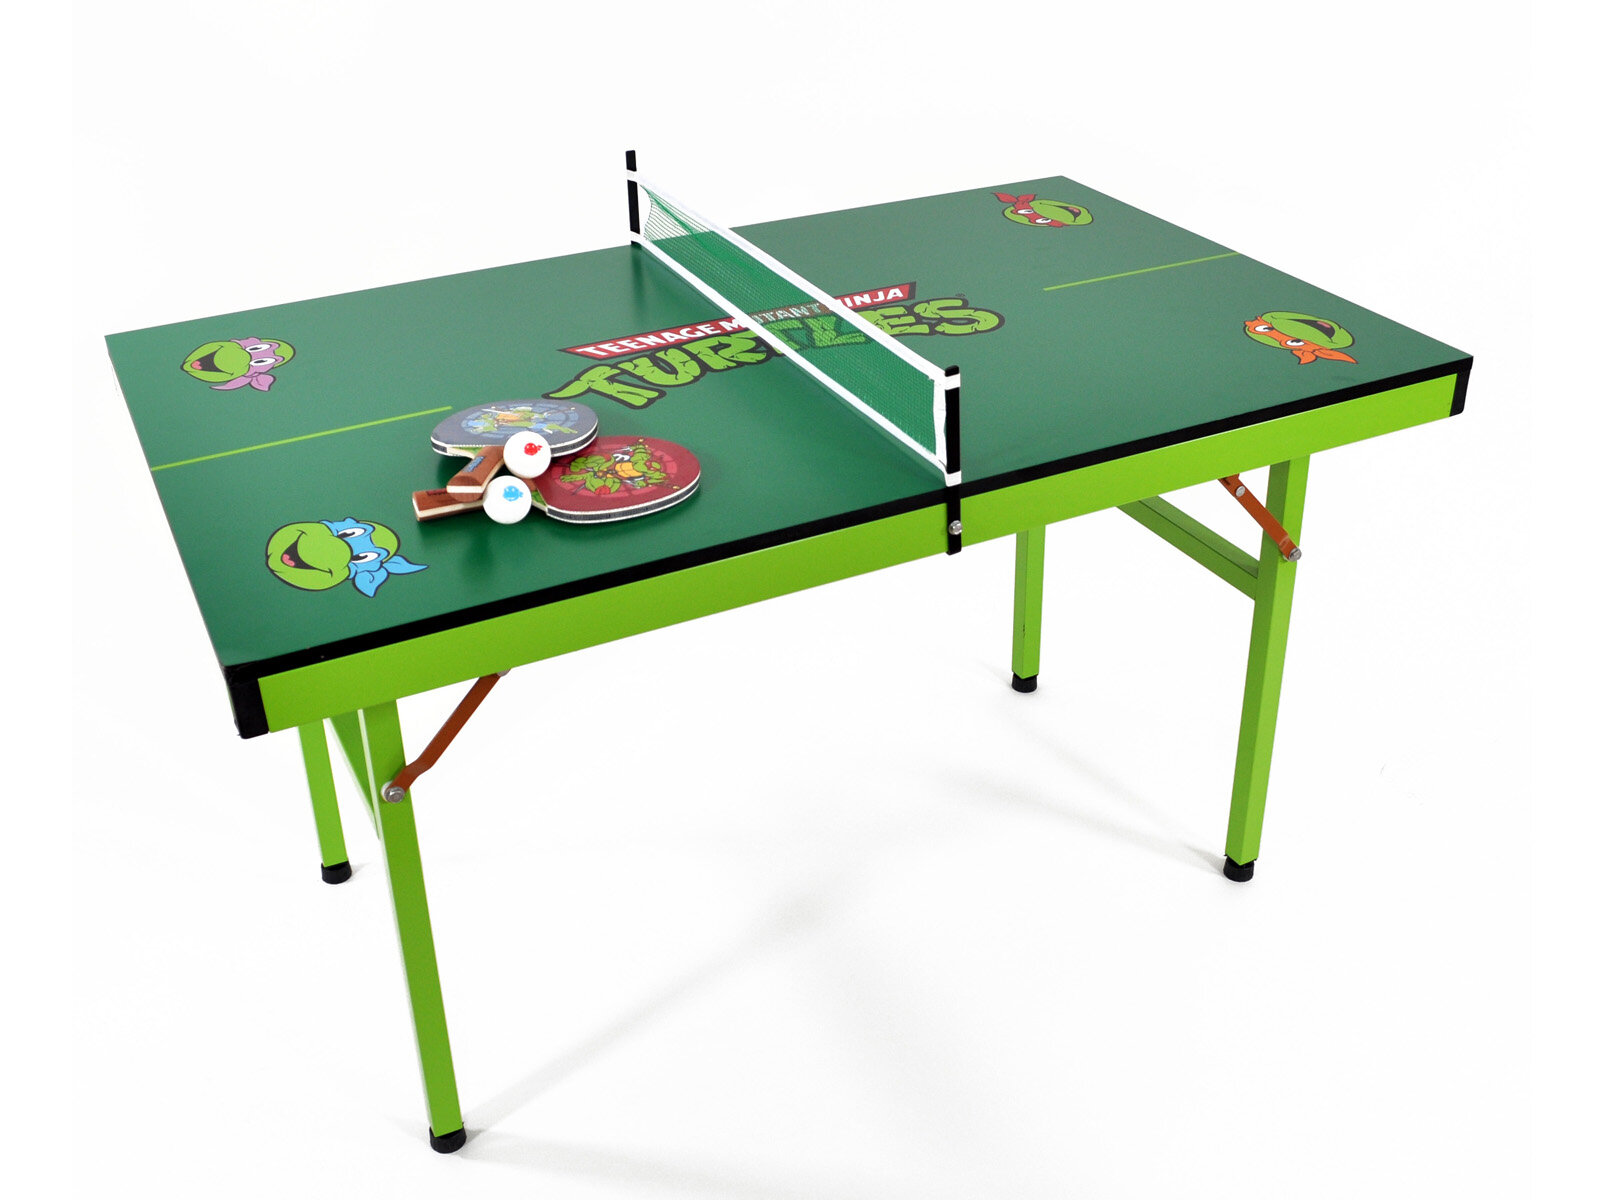 Ping Pong Tables, Kettler Table Tennis @ Free Assembly & Delivery